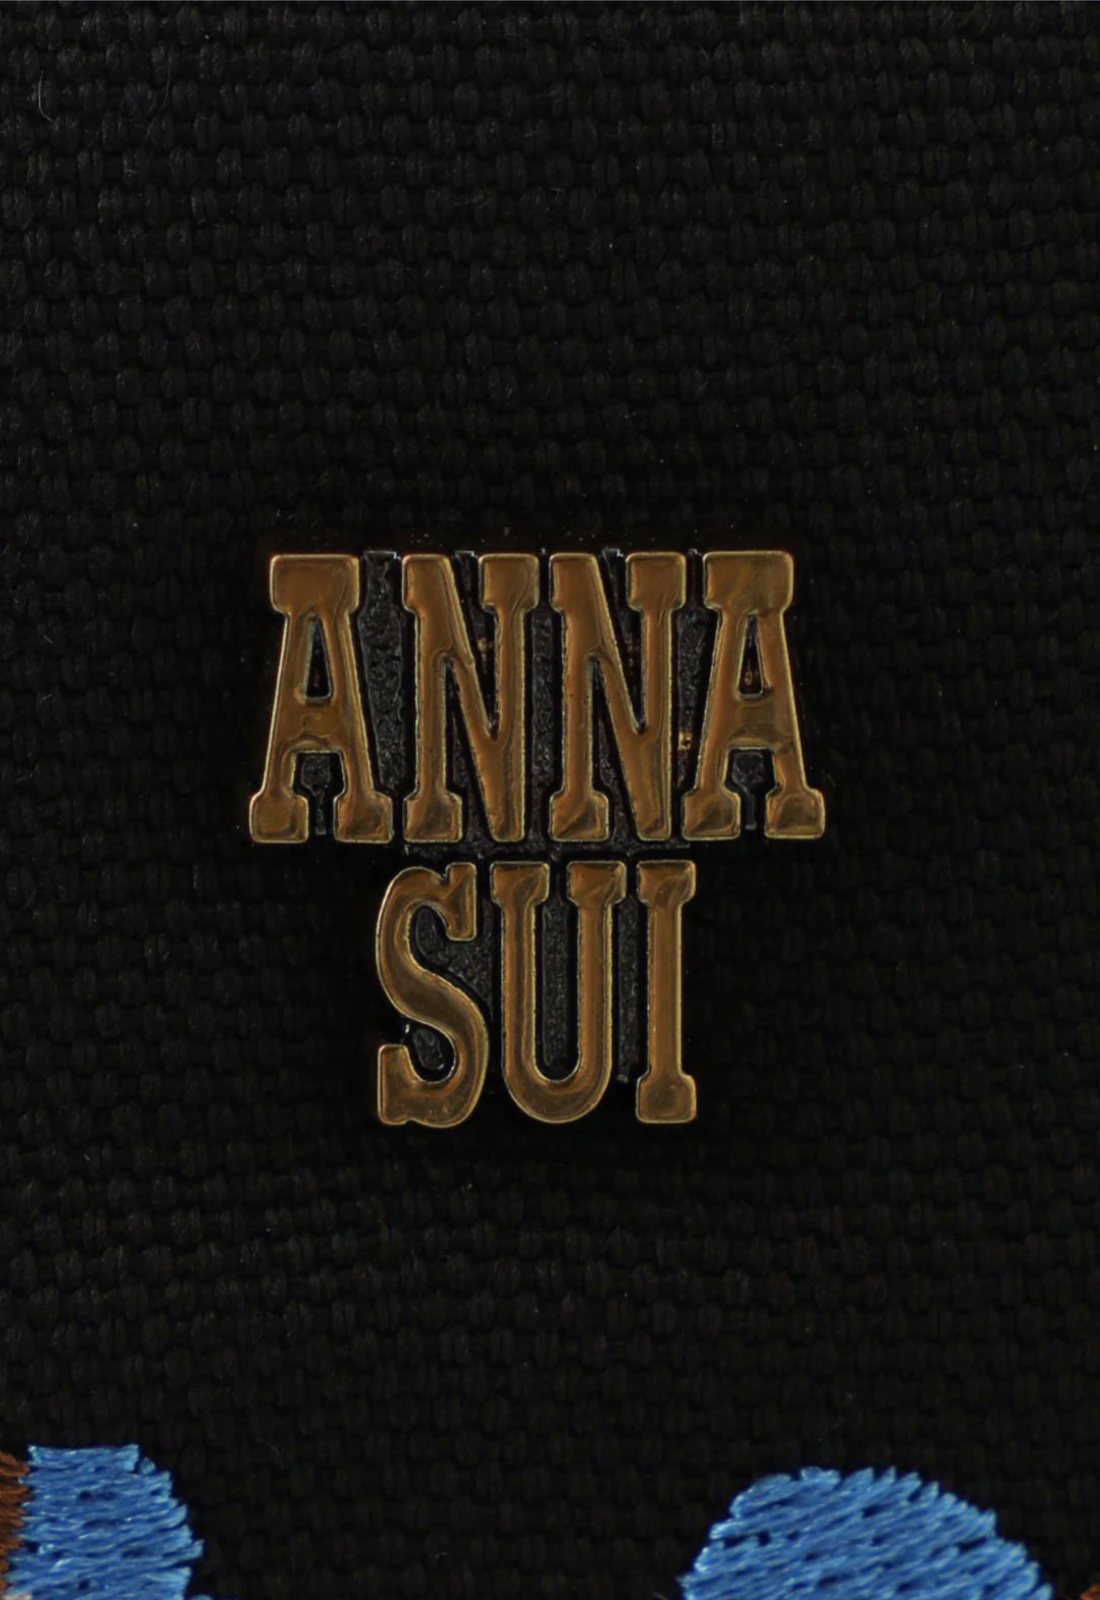 Peacock Tote Bag back with Anna Sui's artist label in golden font 